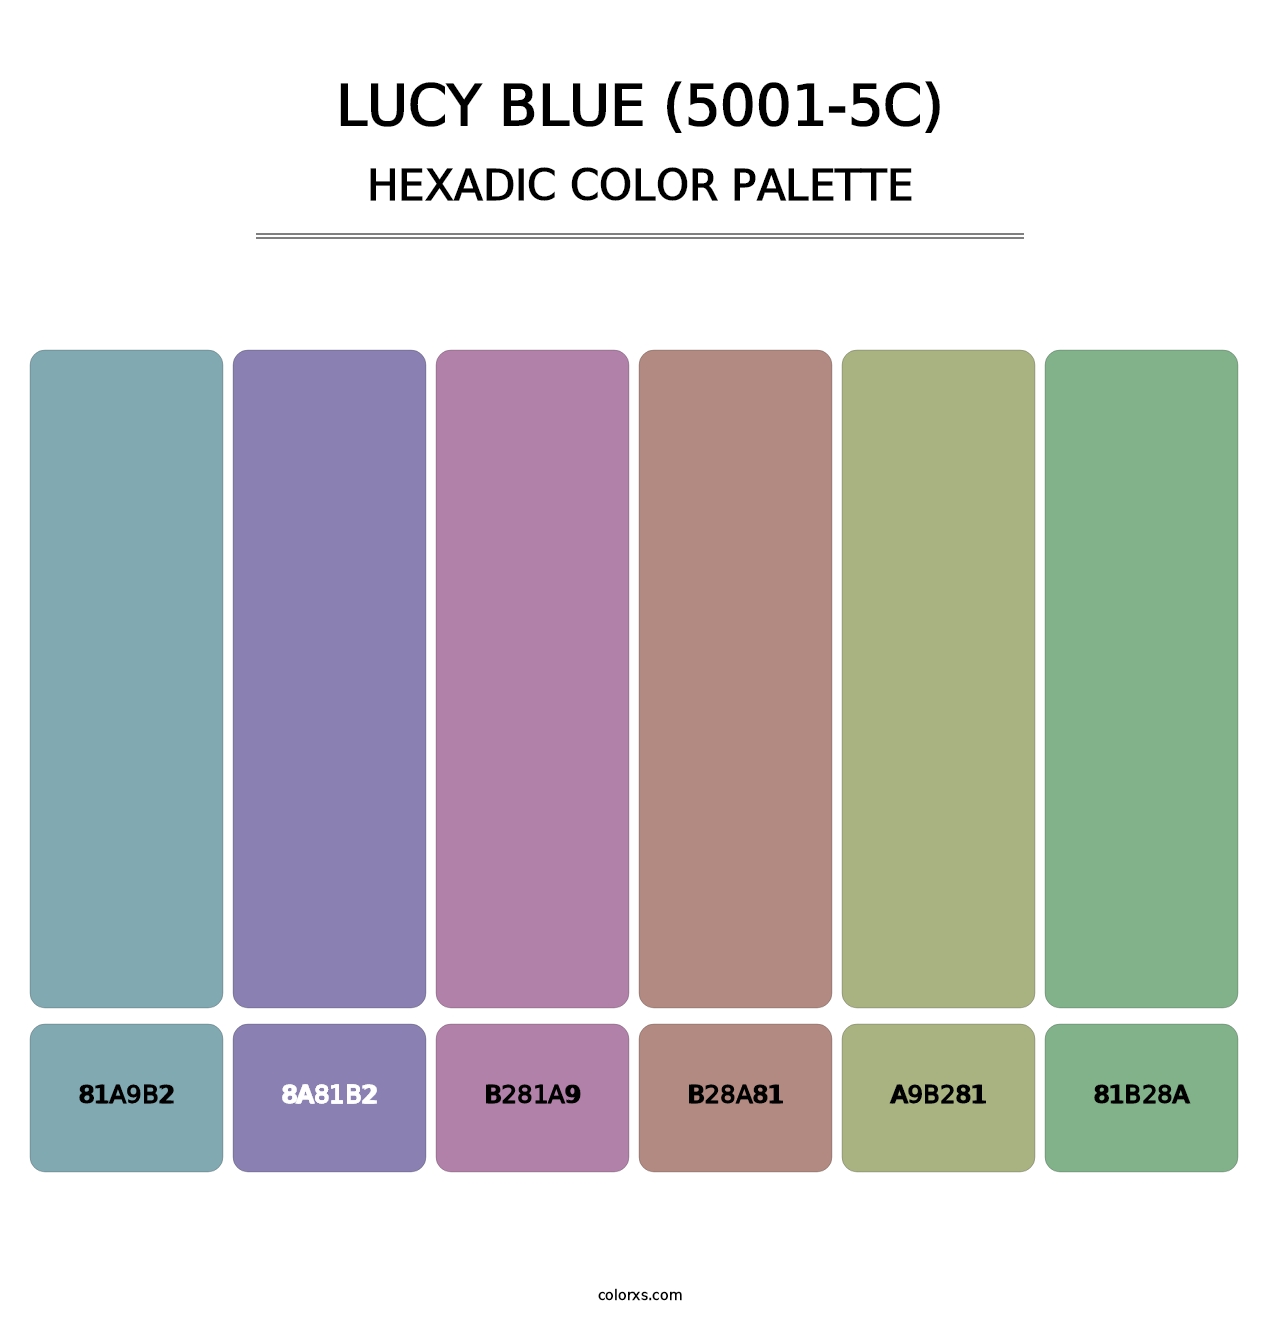 Lucy Blue (5001-5C) - Hexadic Color Palette